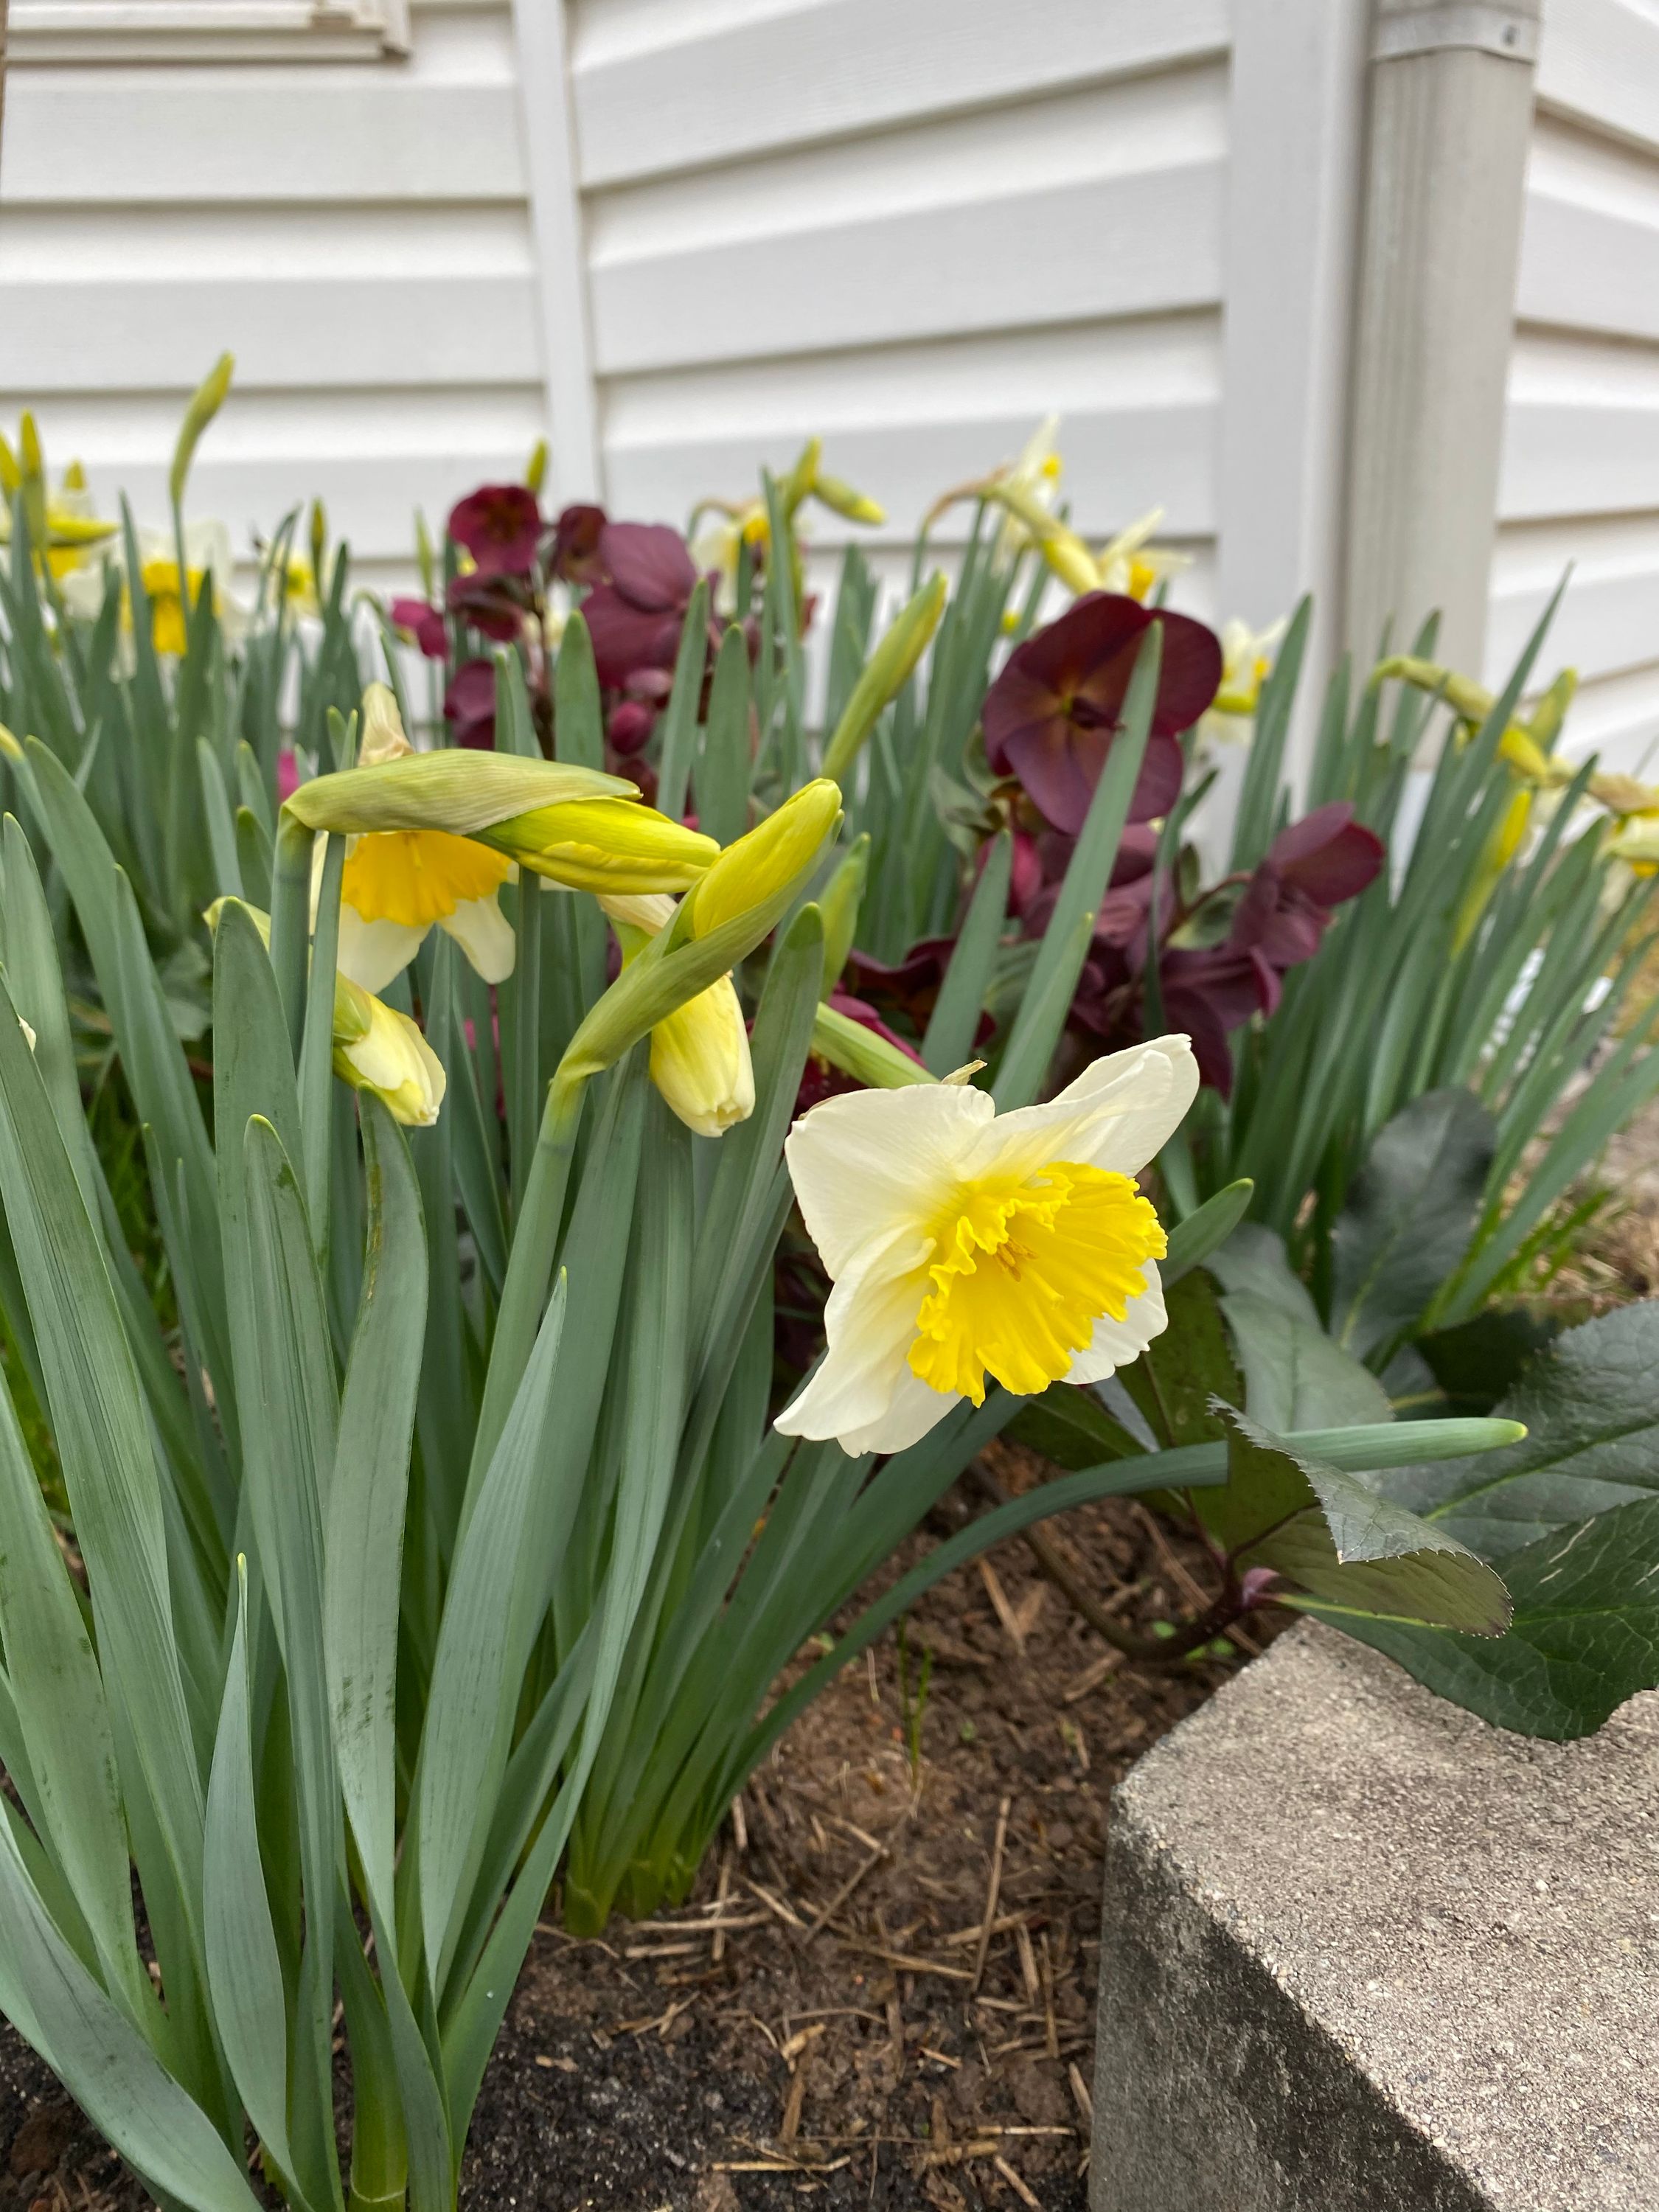 Daffodils in bloom in March